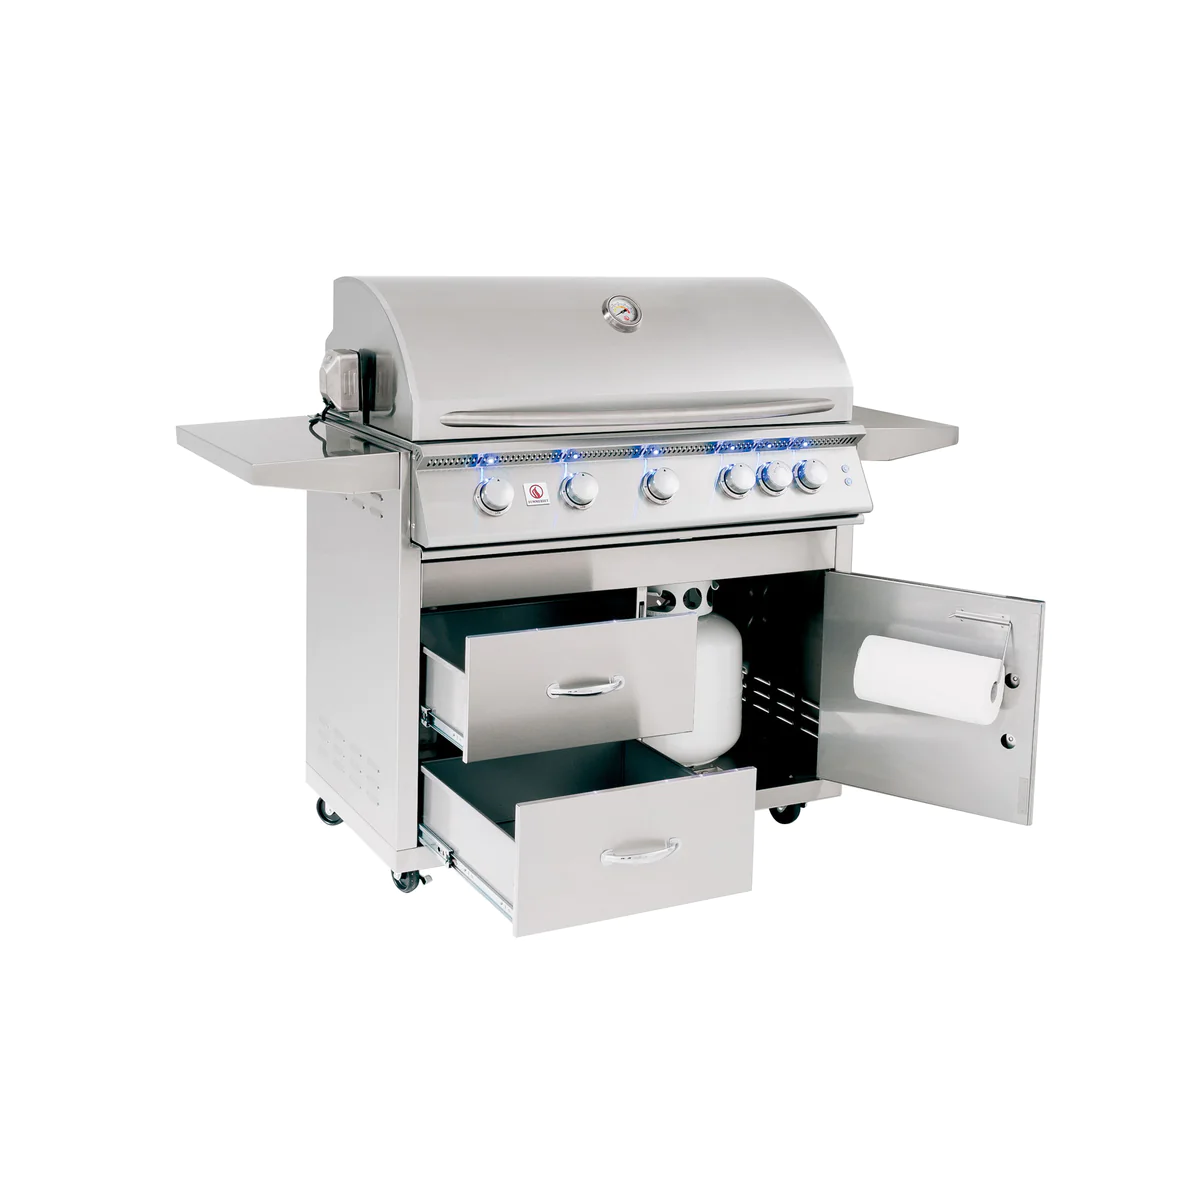 Summerset Sizzler Pro Series 40 Inch Built-In Gas Grill - SIZPRO40-NG